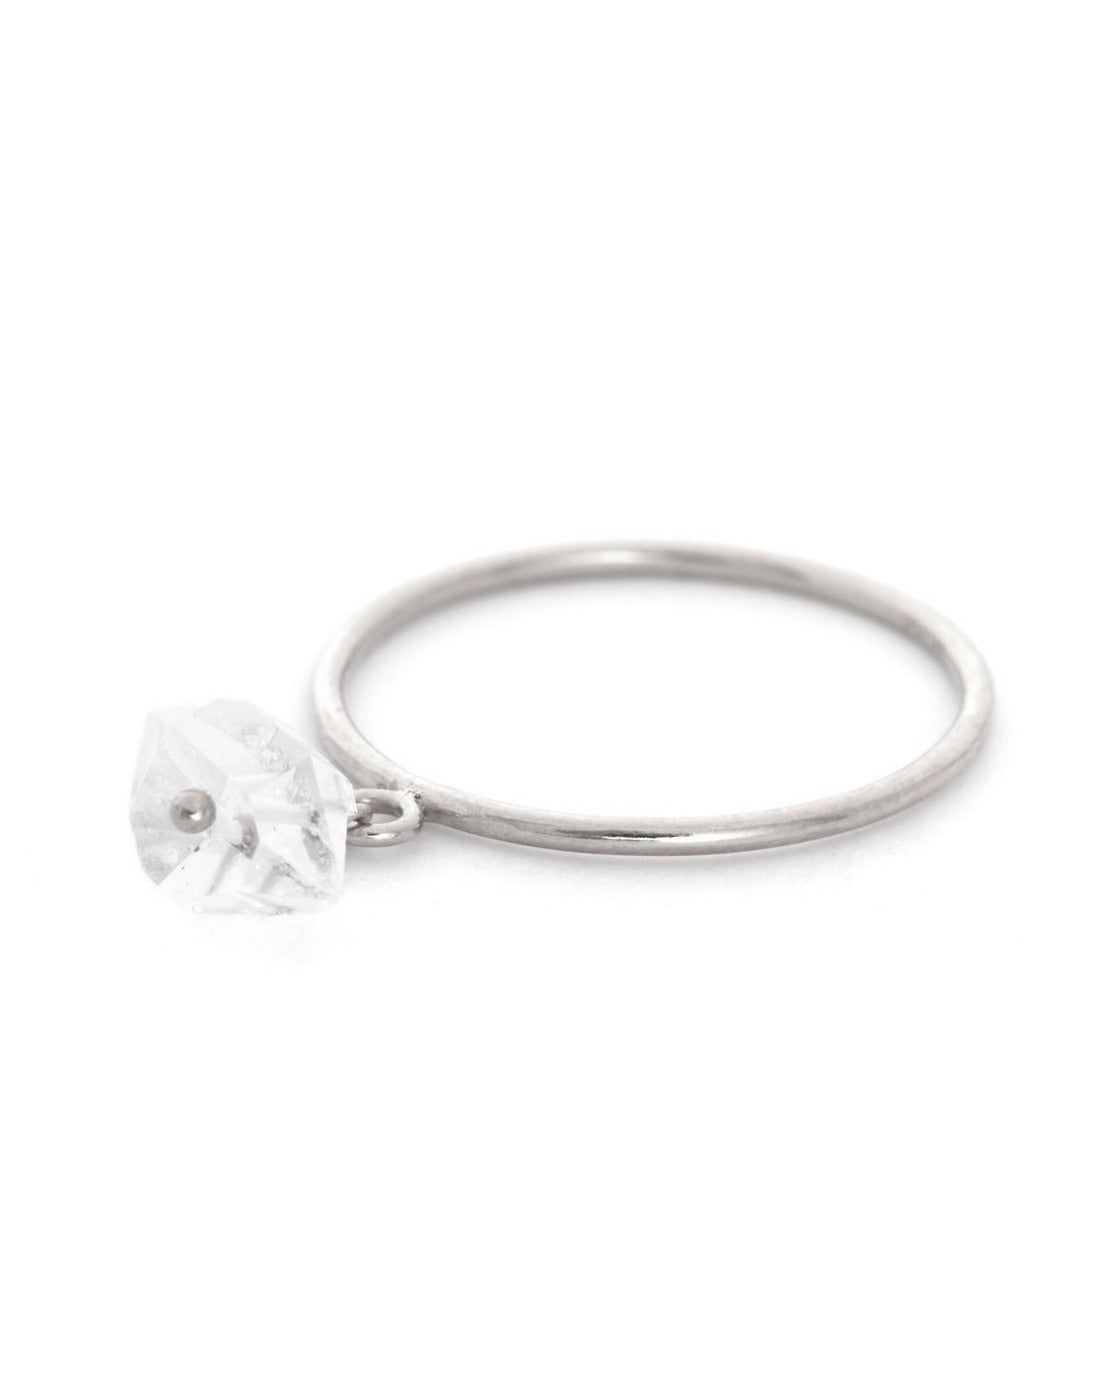 Petal Ring by KOZAKH. A 1mm band crafted in Sterling Silver, featuring a Herkimer Diamond charm.